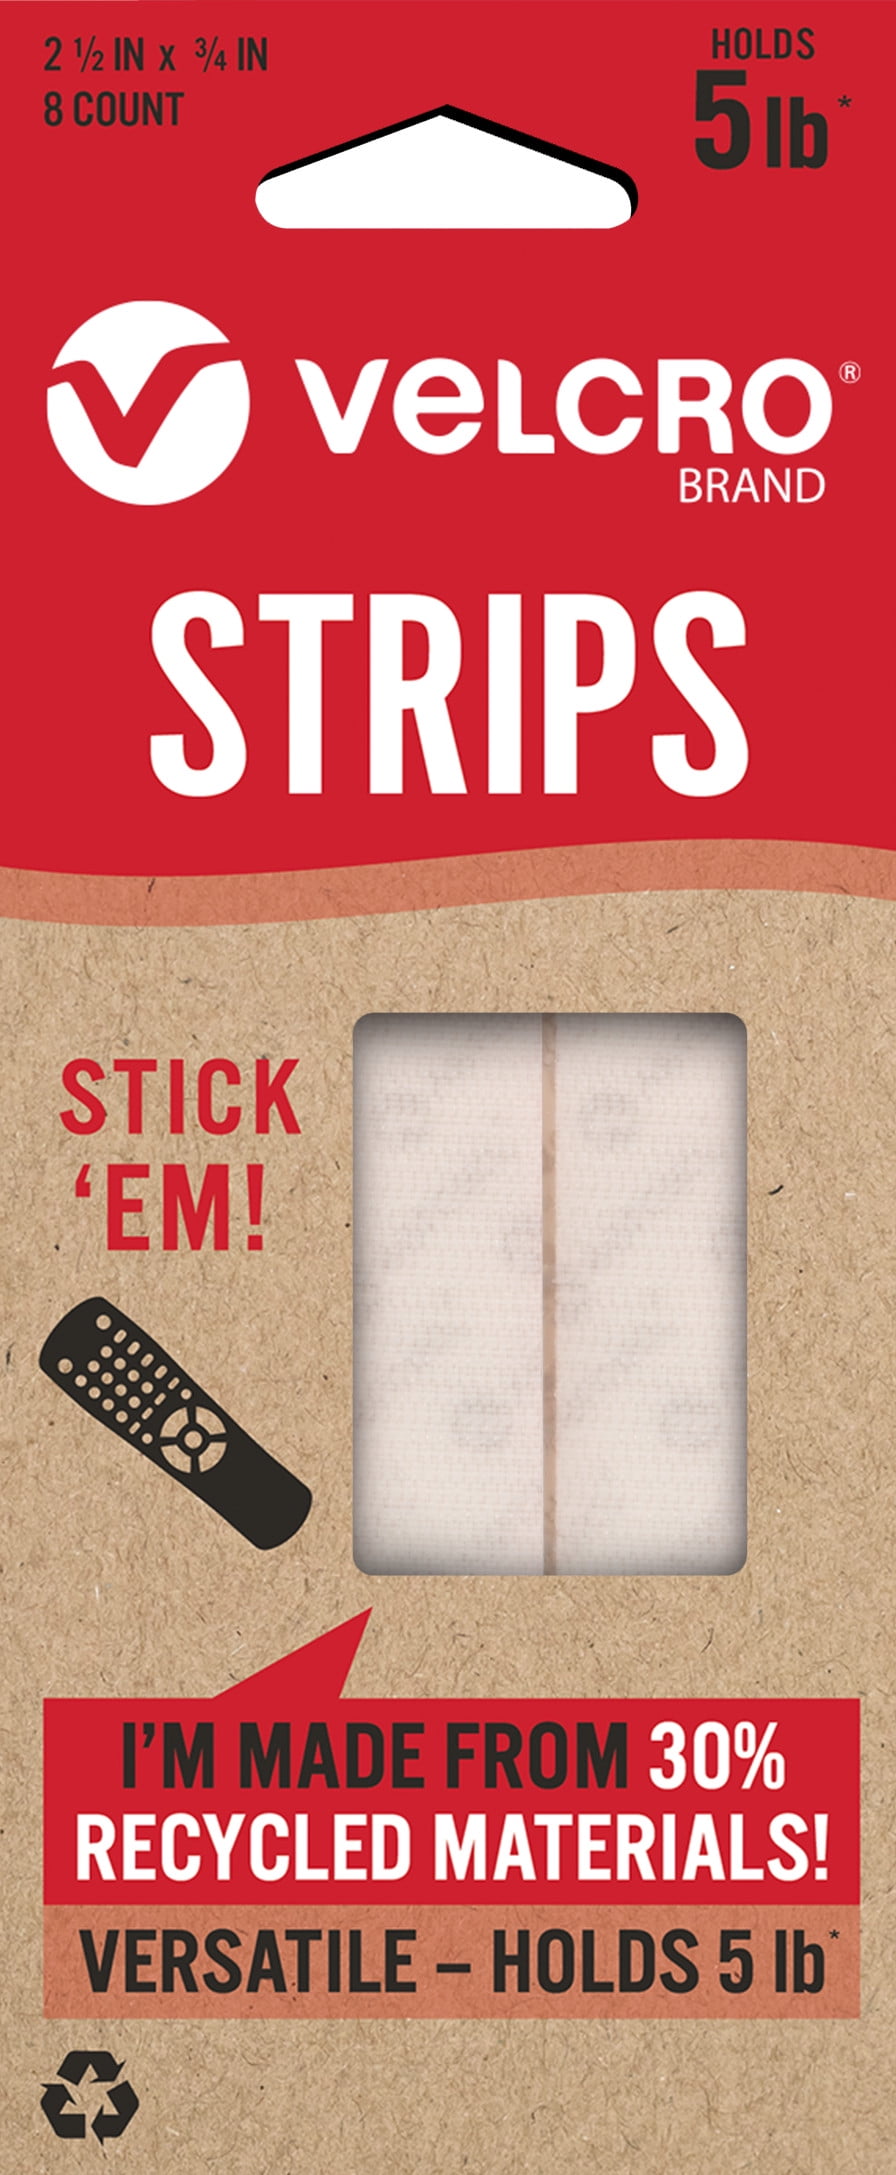 VELCRO Brand ECO Collection Stick On Adhesive Strips 2 1/2in x 3/4in, Sustainable 30% Recycled Material, 8ct White